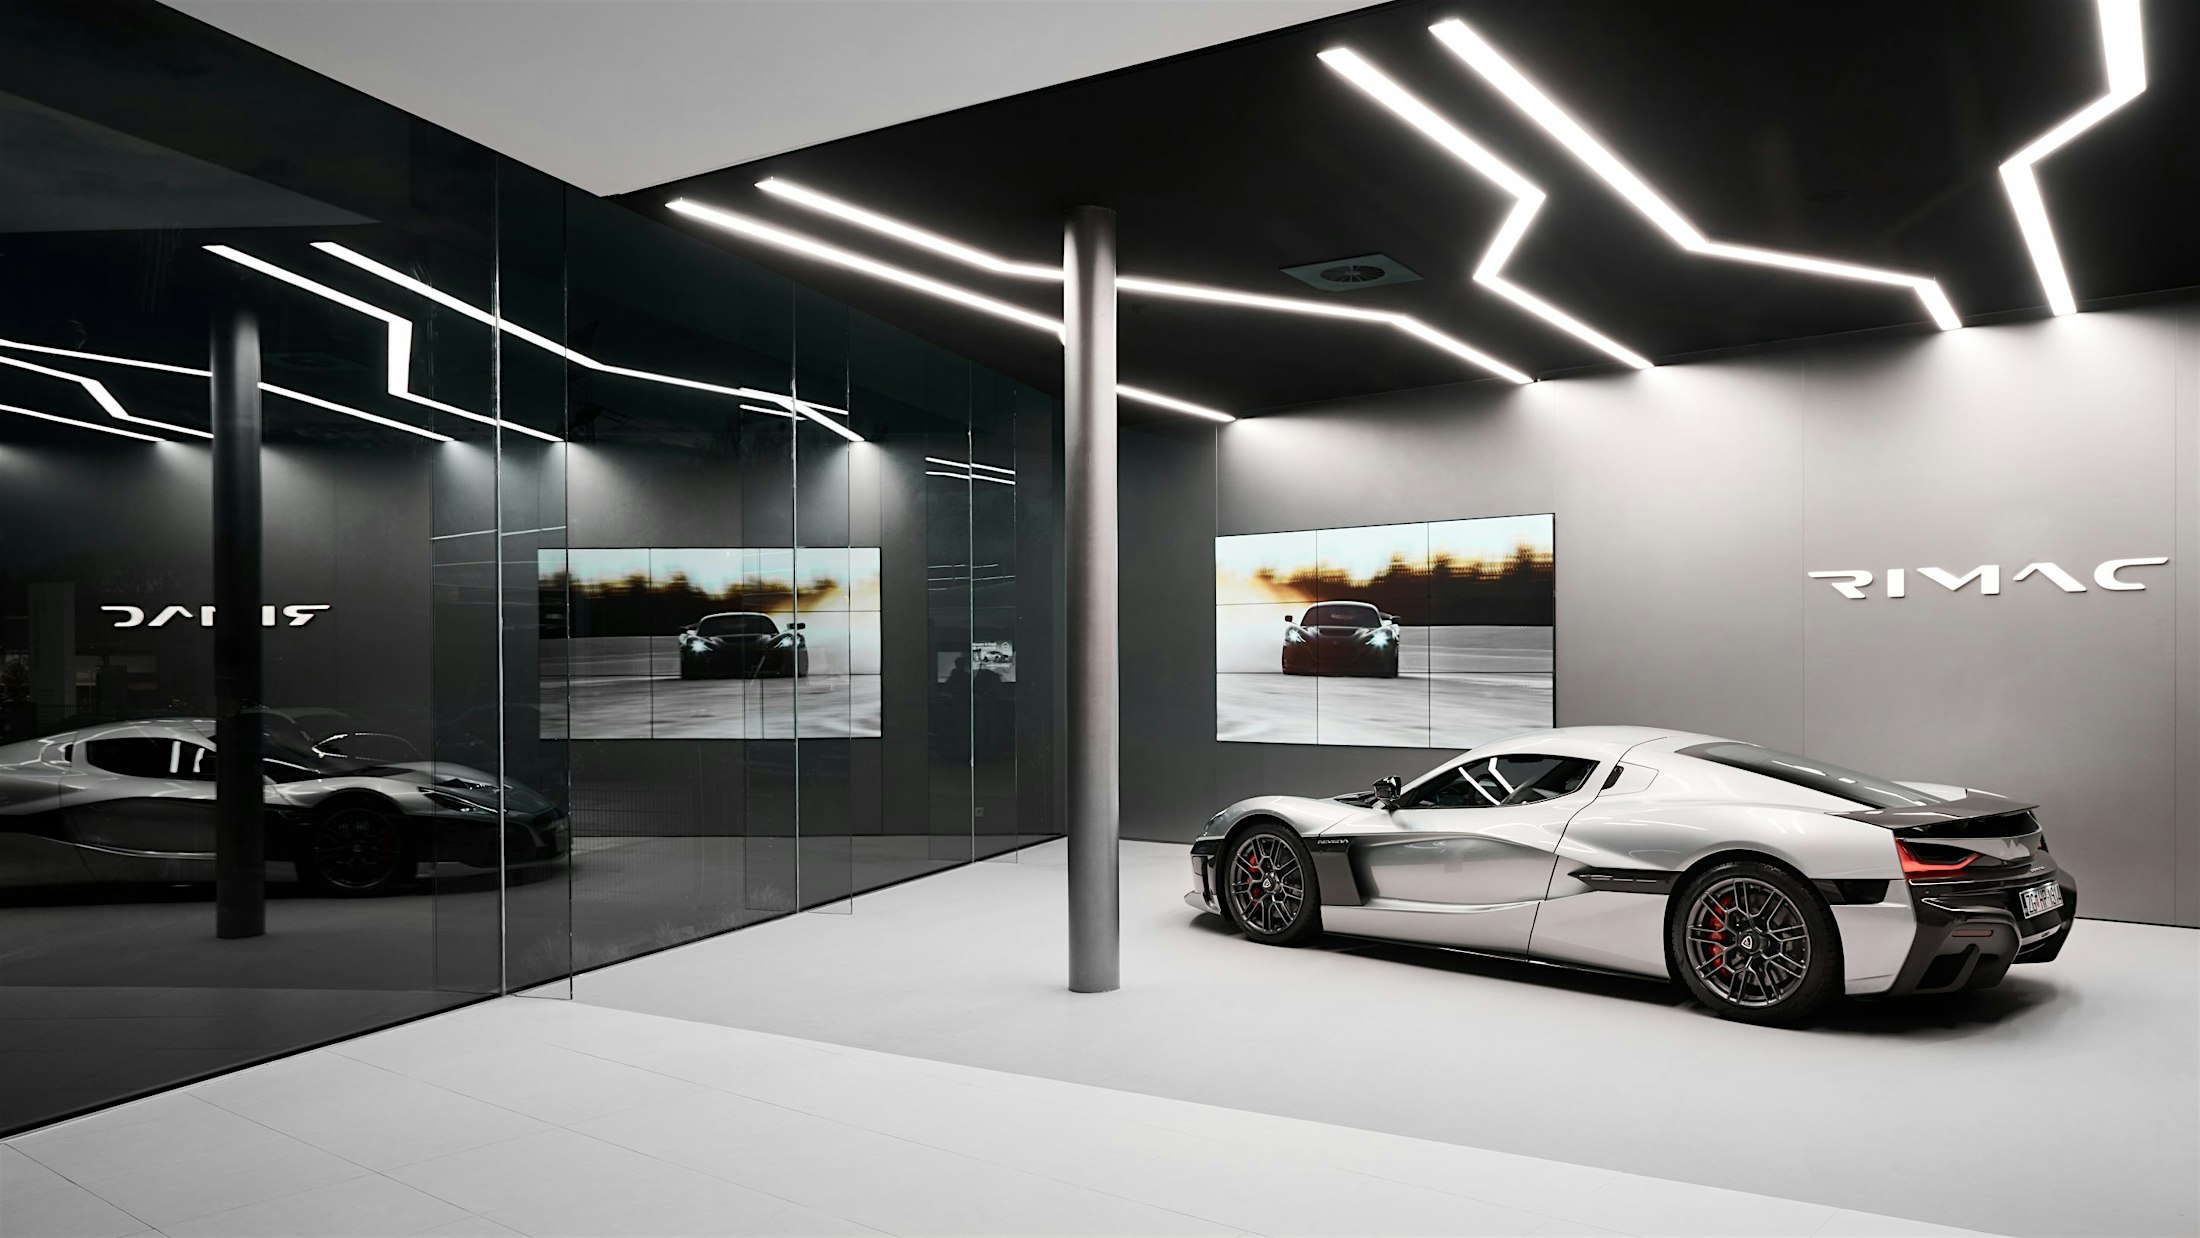 Rimac Expansion Gathers Pace With Opening Of A New Showroom In The Heart Of Europe